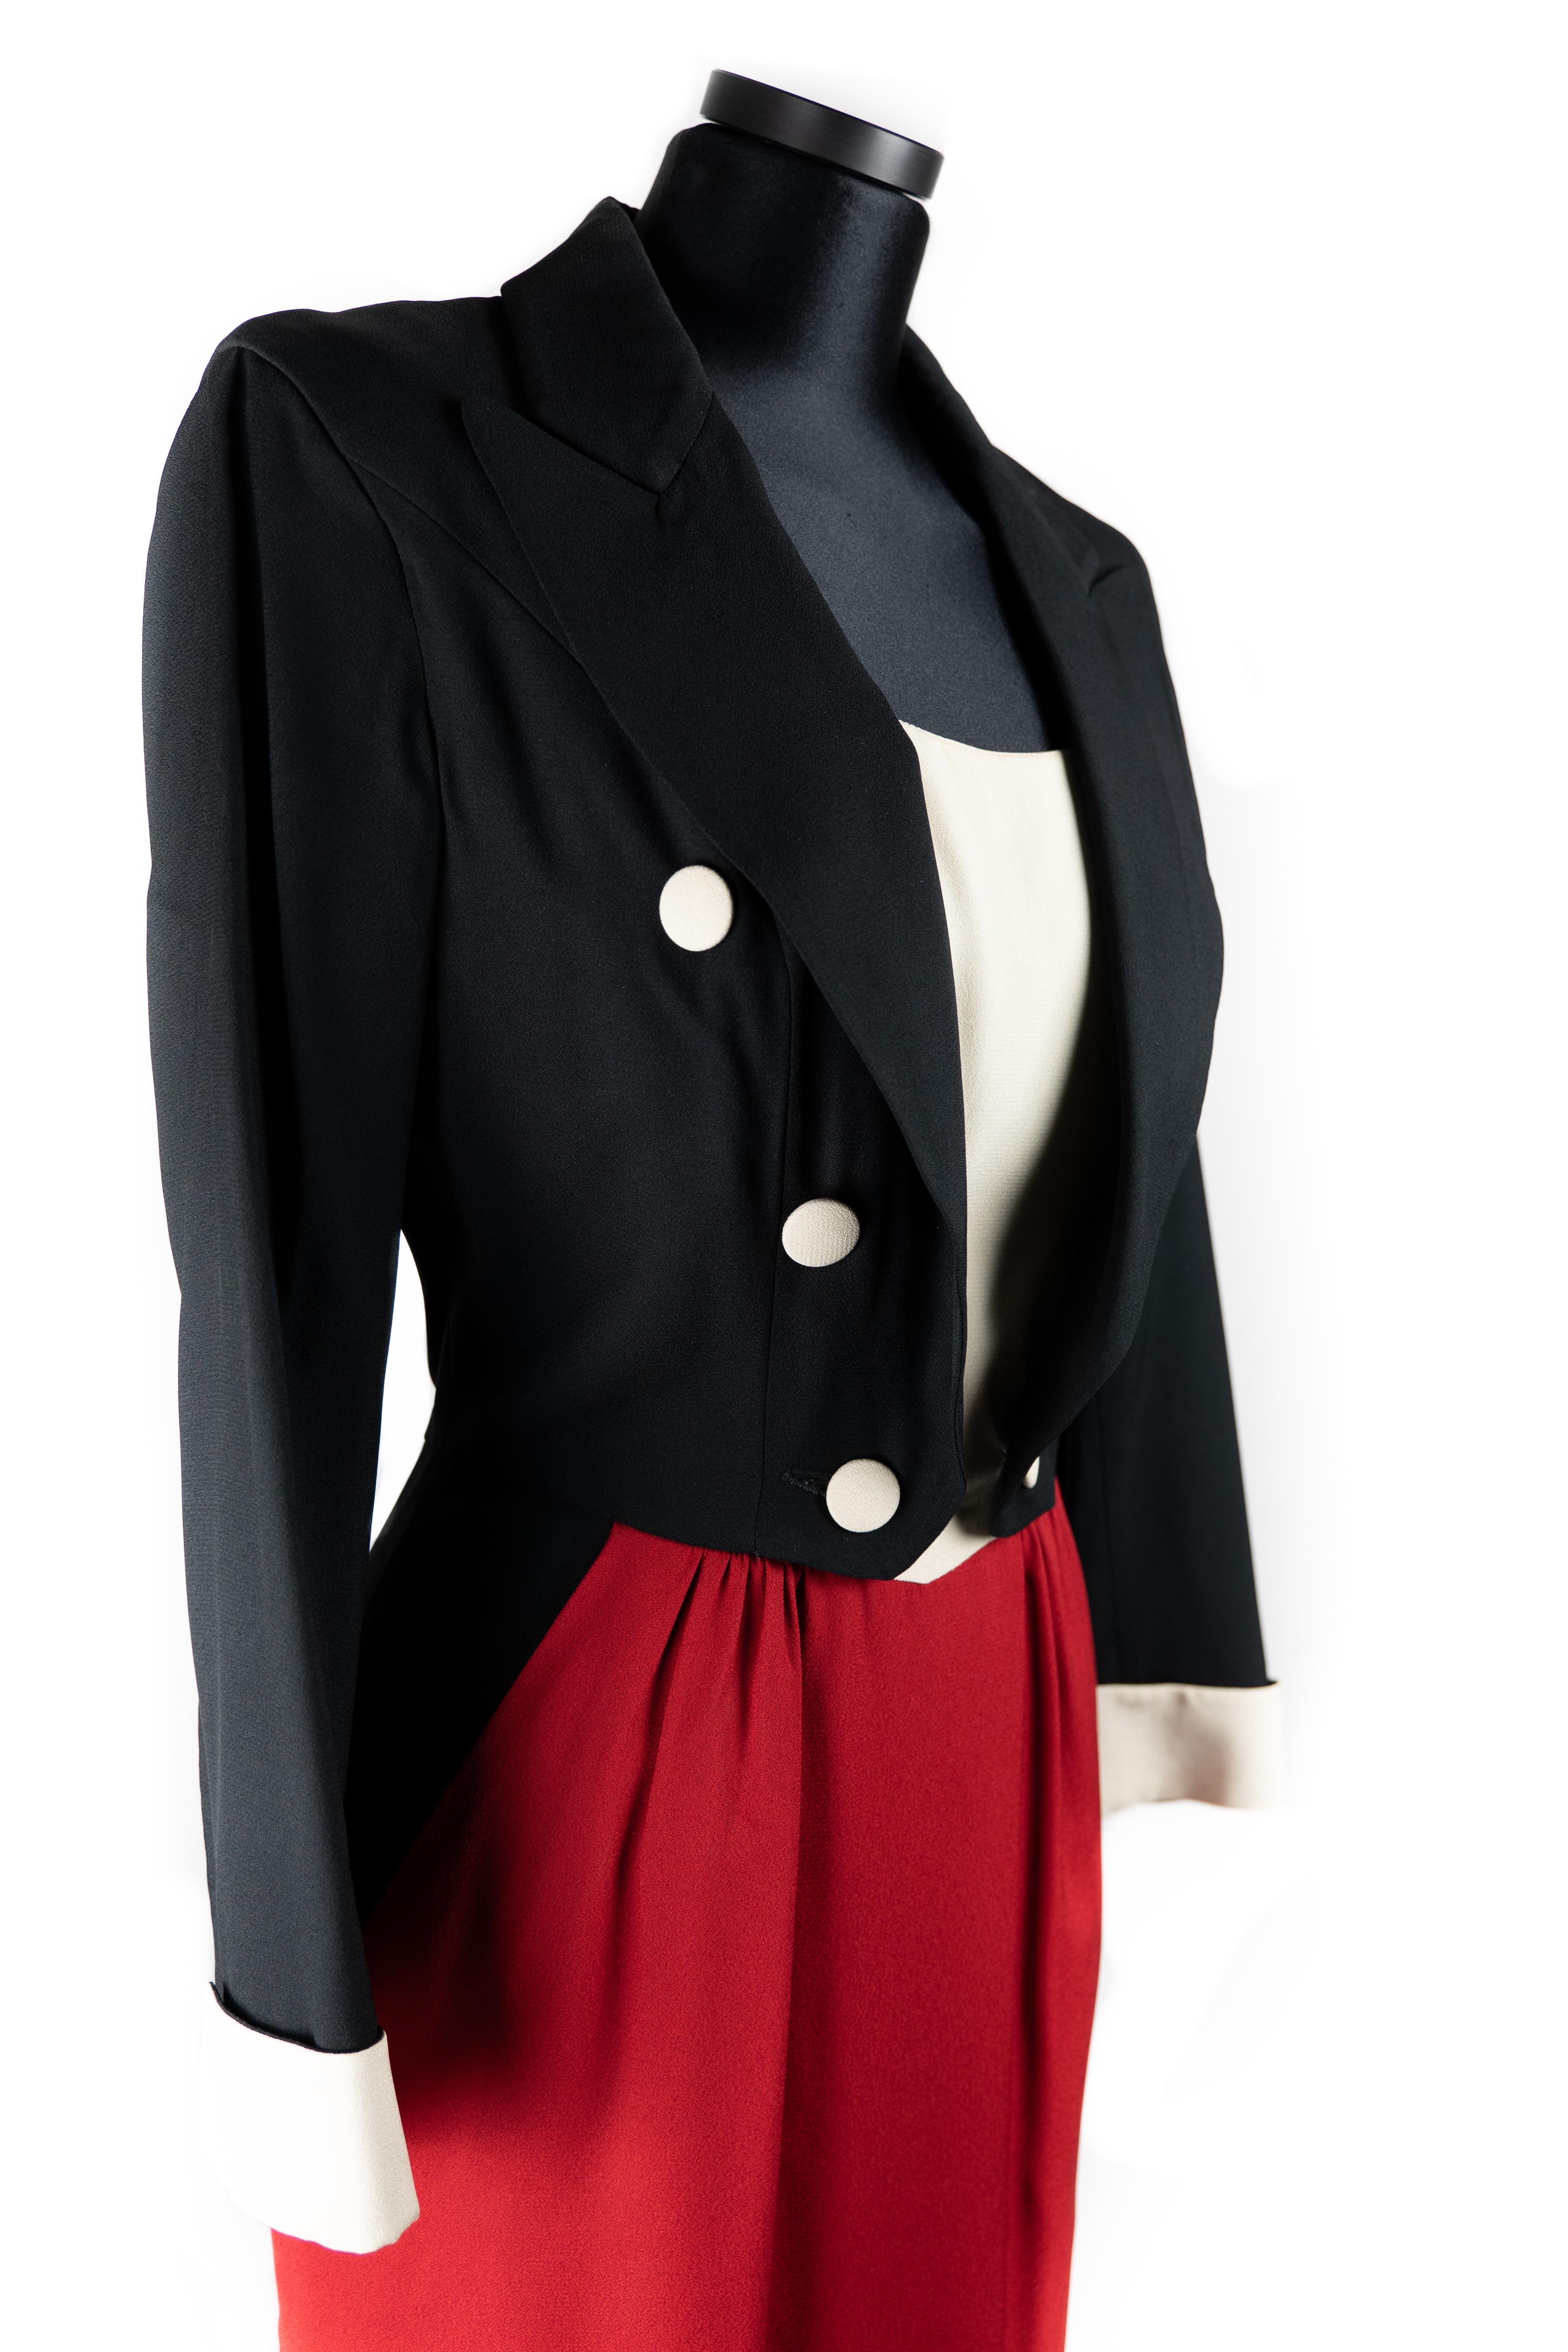 Moschino Cheap And Chic Tuxedo Dress. Circa 1990s.
Featuring black double breast jacket, long sleeves and fold cuffs matching white top and buttons. The straight skirt presents pockets, a back vent, and the appearance of jacket tails in the back. It